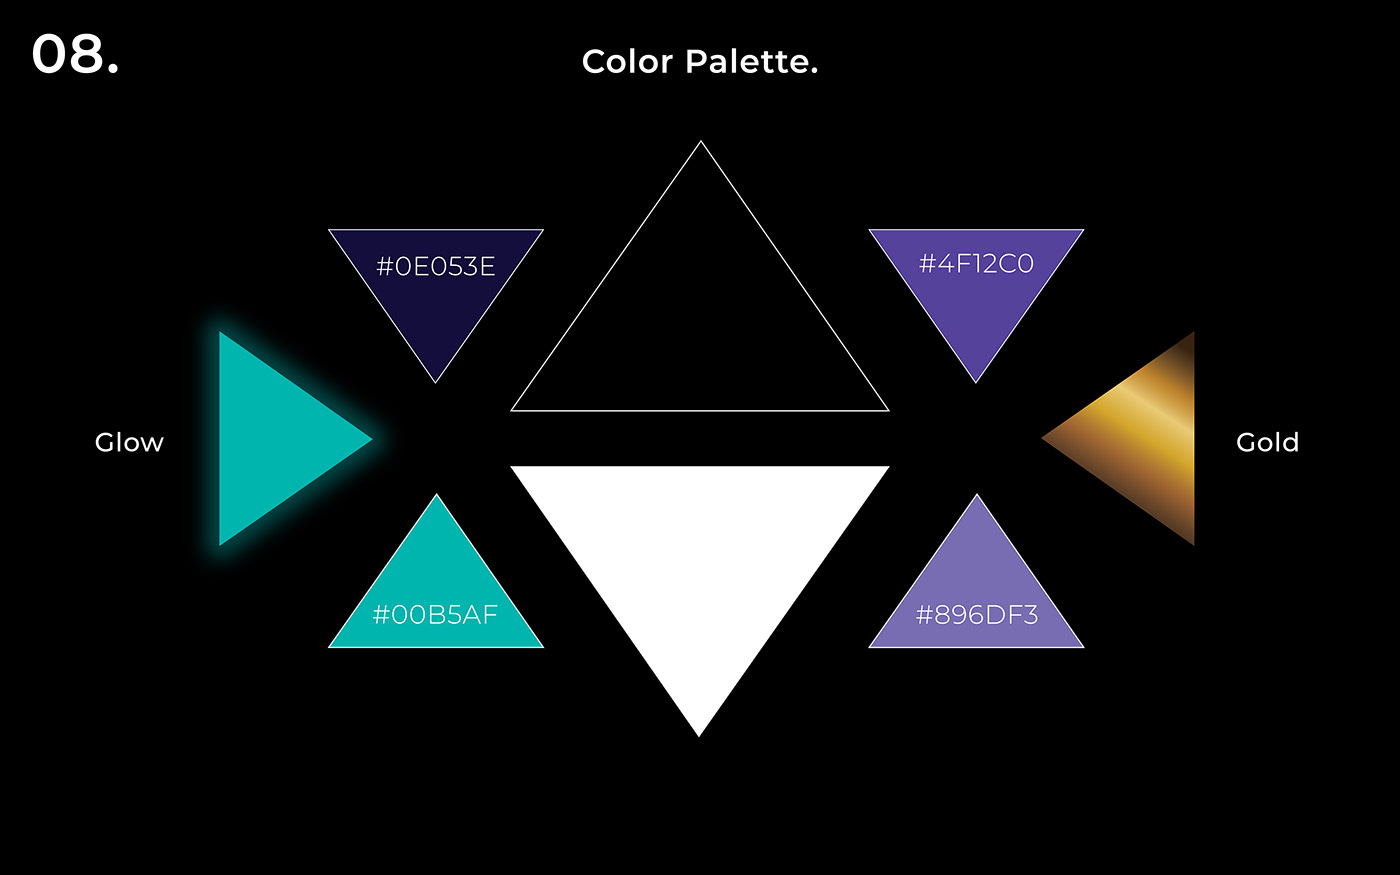 Brand colors and effects in triangle shapes.